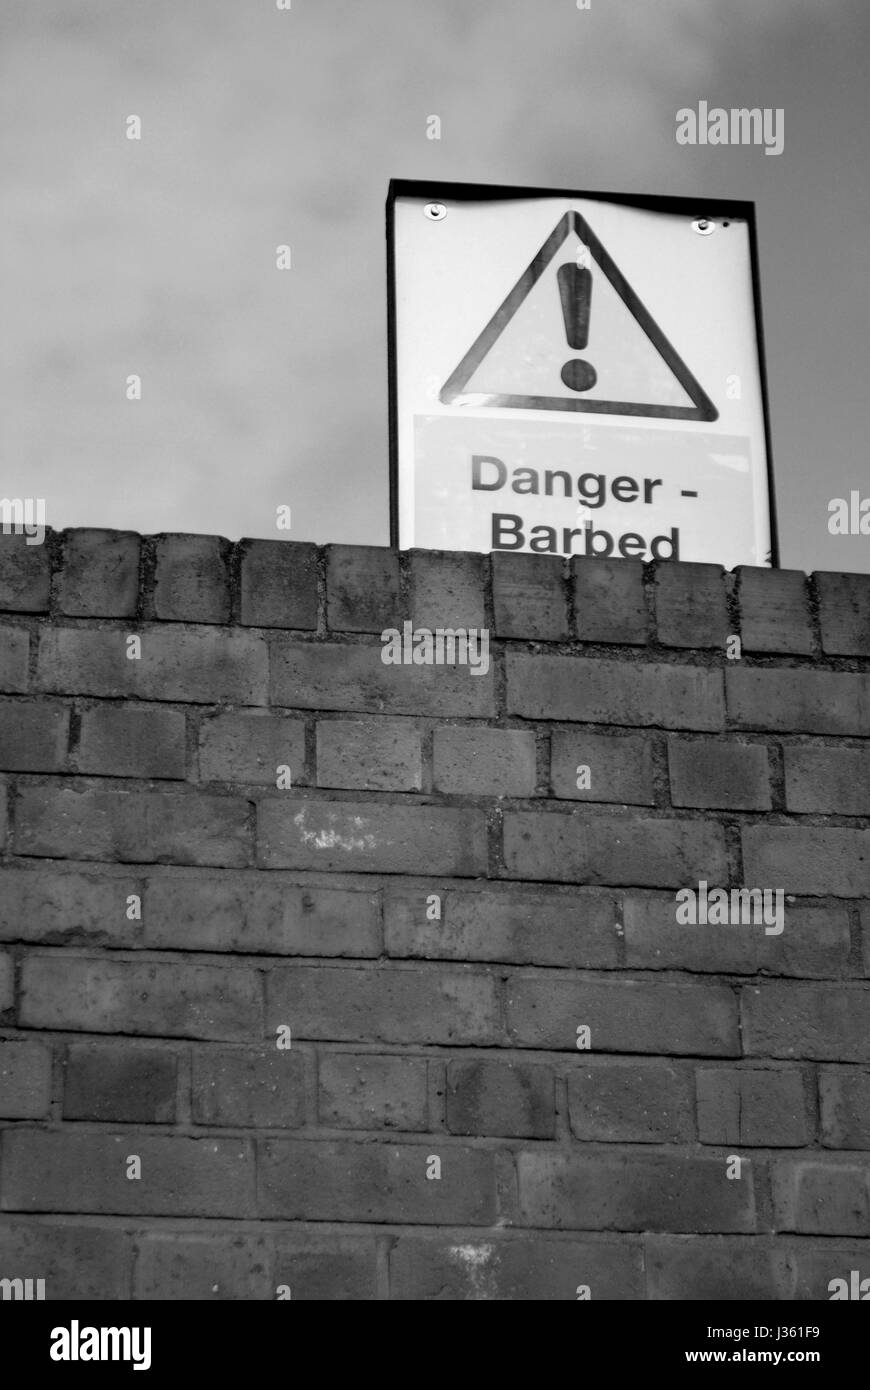 Danger barbed wire Stock Photo